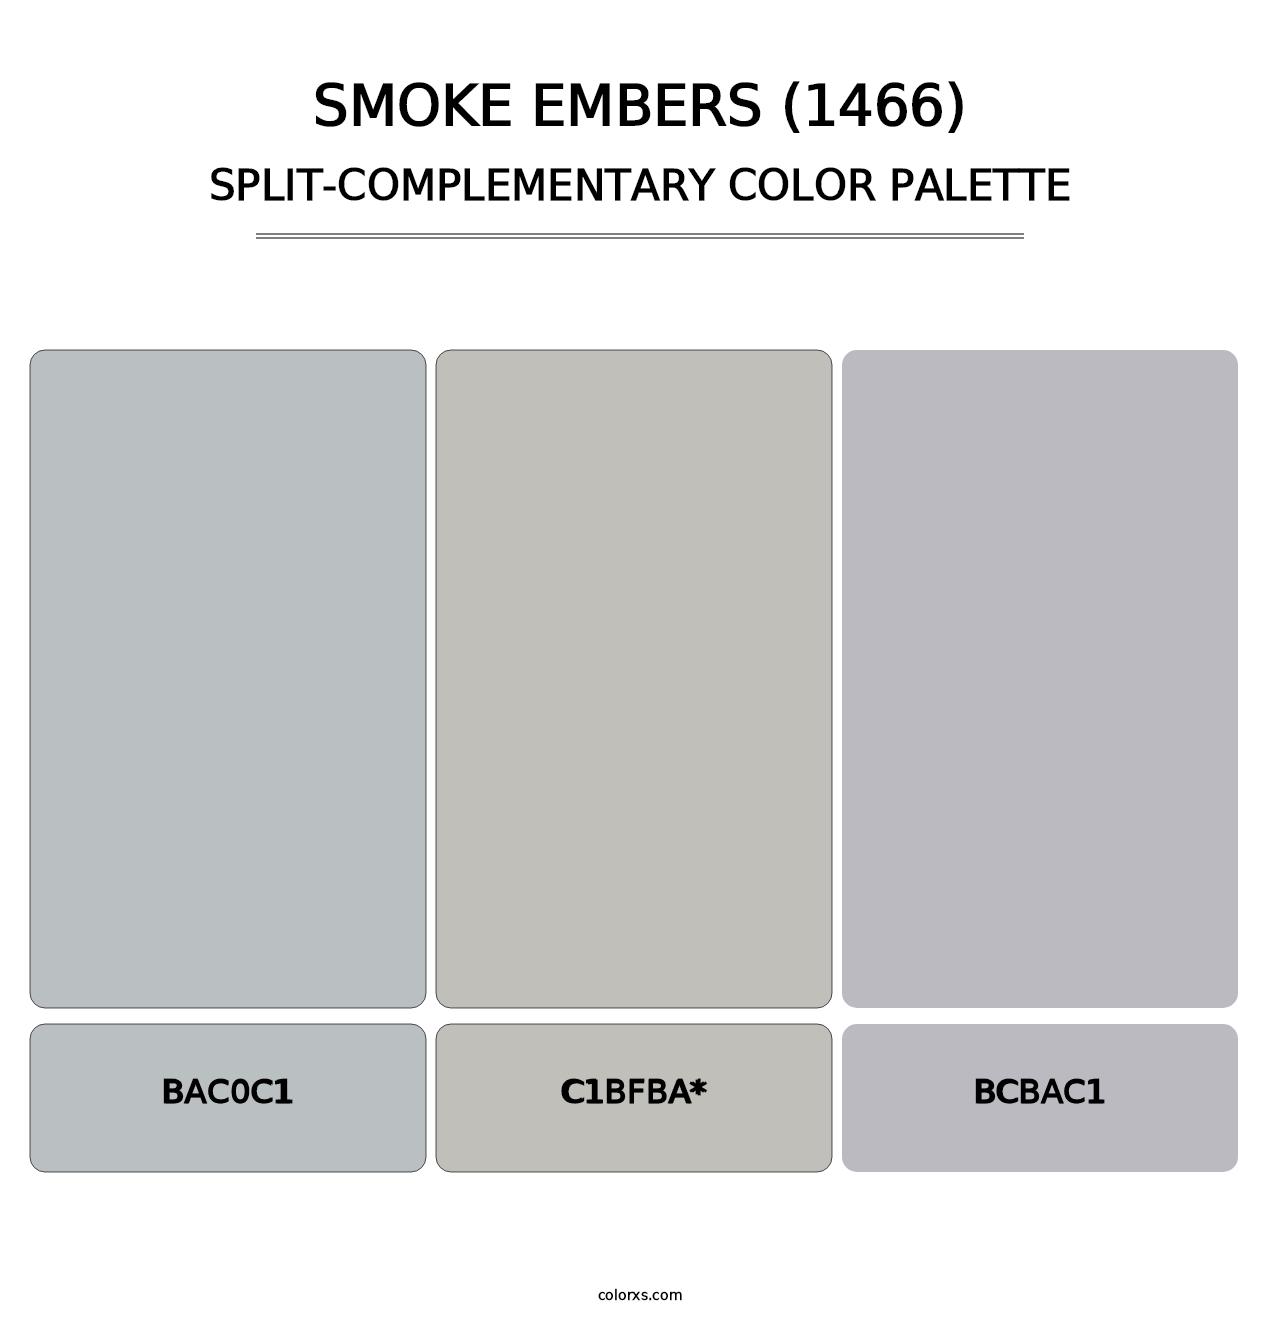 Smoke Embers (1466) - Split-Complementary Color Palette